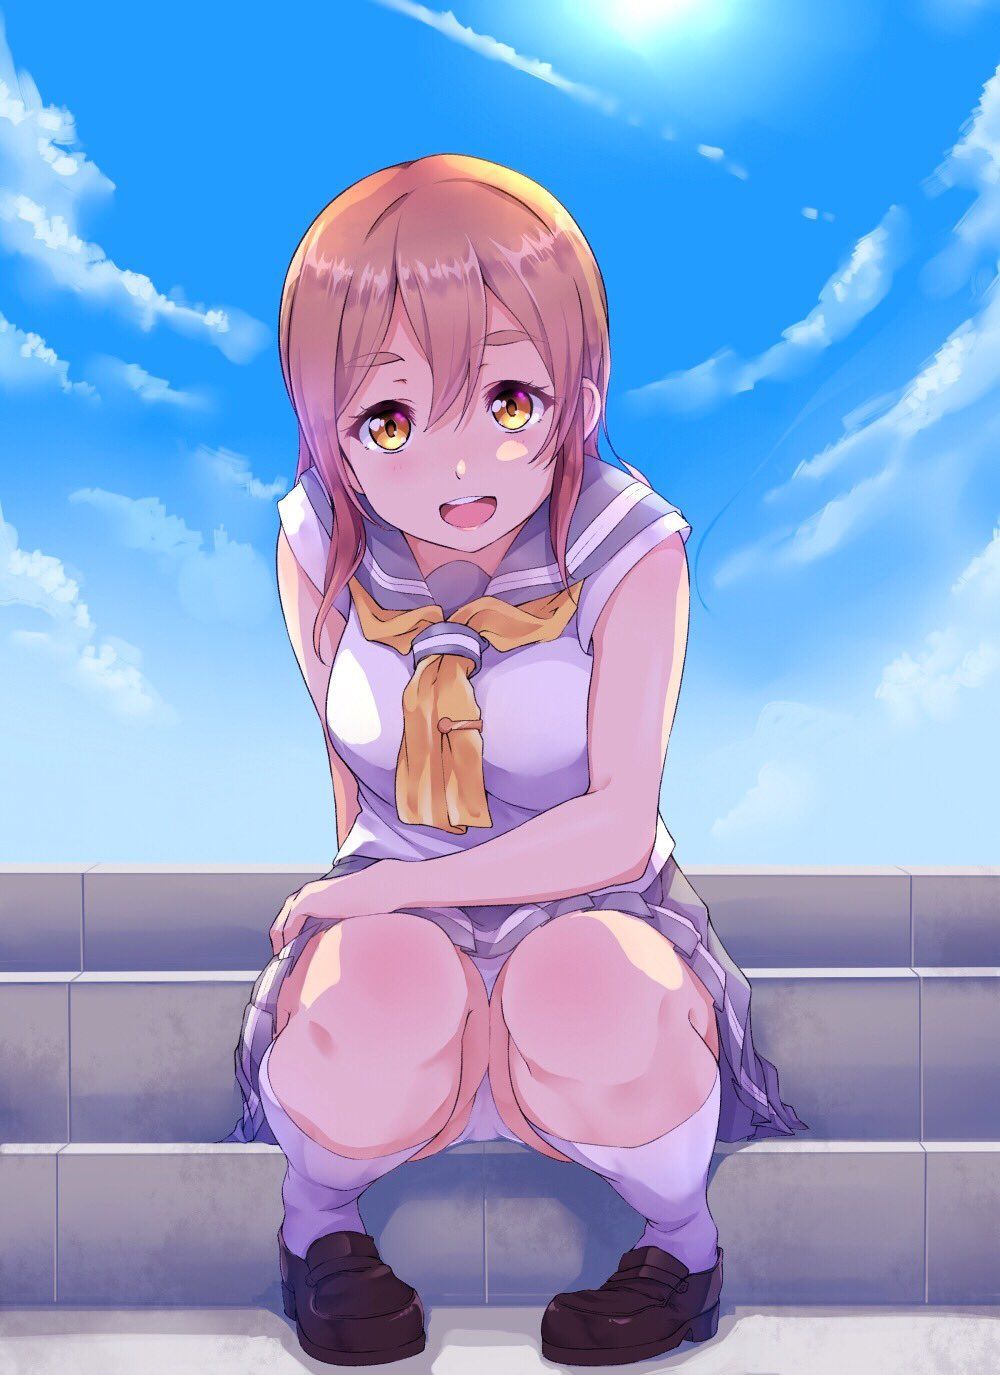 [Secondary/ZIP] Second image of a happy underwear daughter that is just a cloth 18